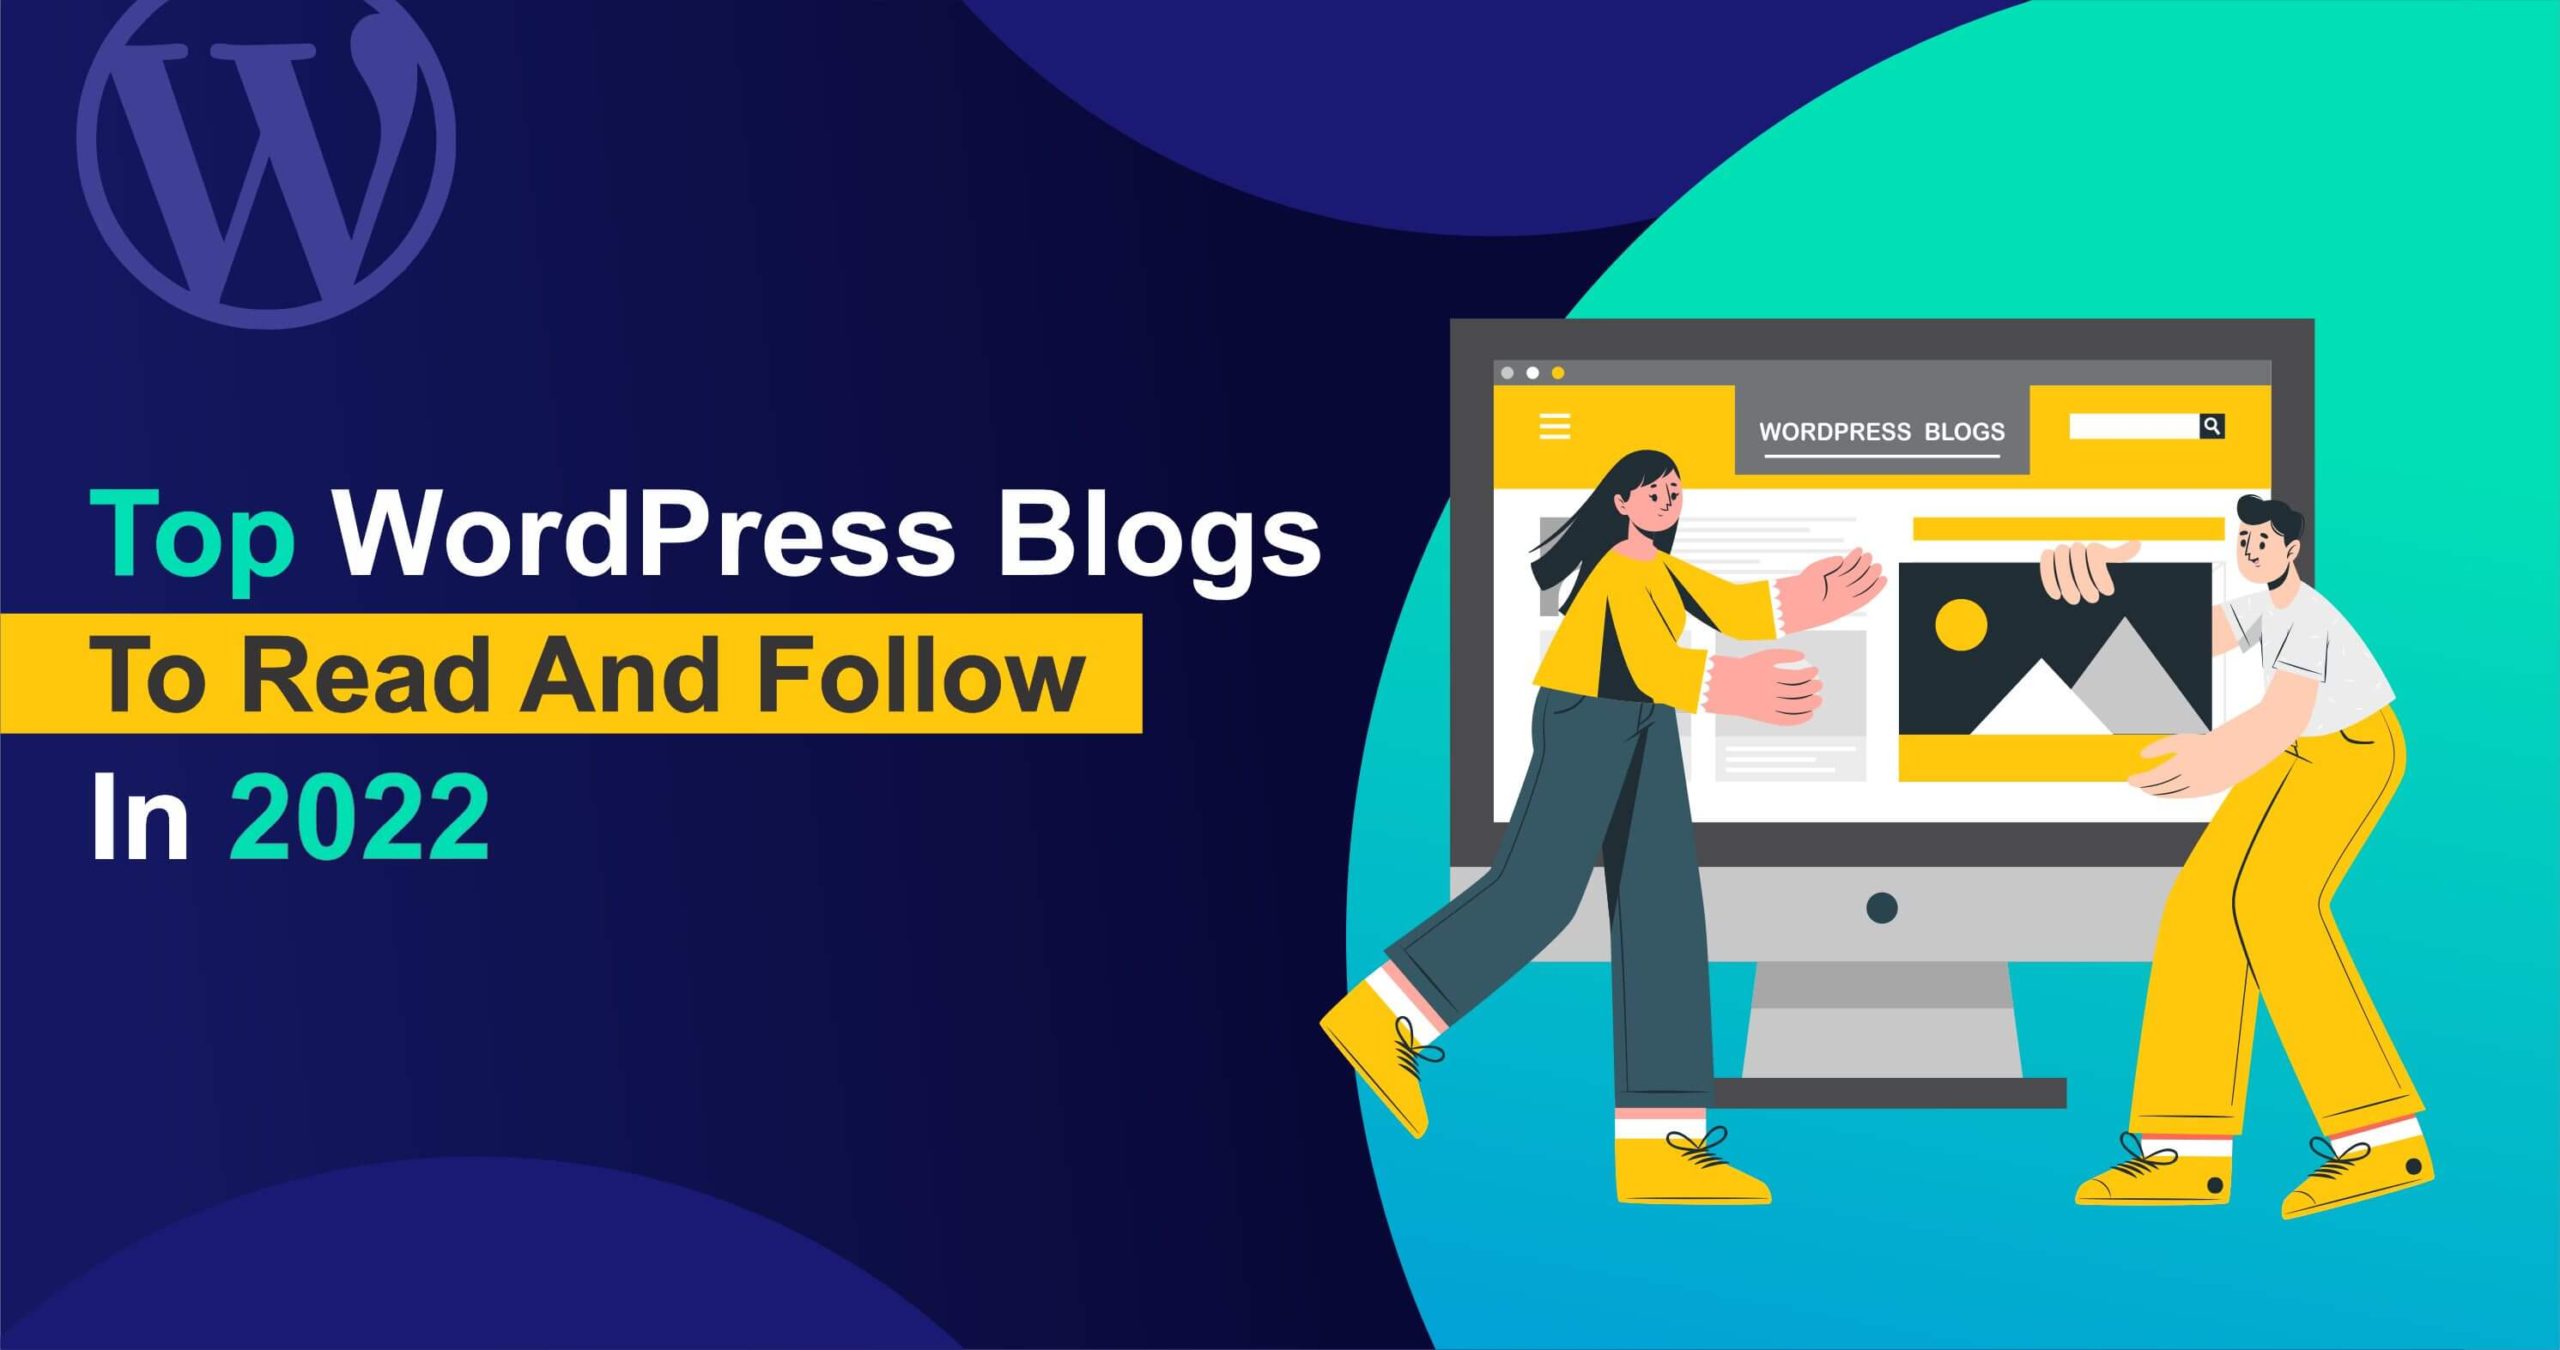 Top WordPress blogs to read and follow in 2022